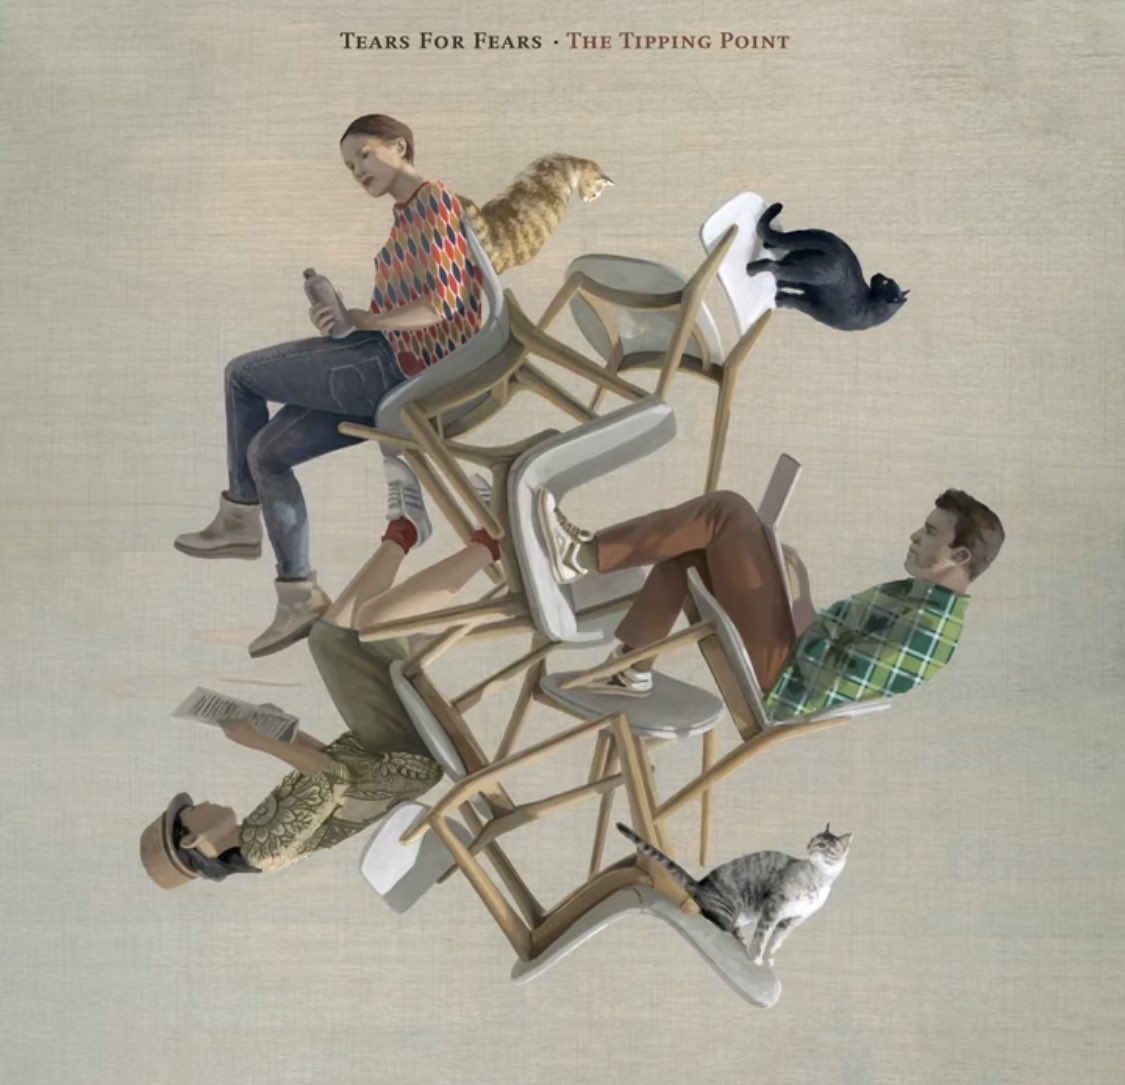 #NowPlaying 
ティアーズフォーフィアーズ 17年ぶり最新アルバムThe Tipping Pointから🎸
youtu.be/5AD23PCj0_s
#TearsForFears 
#BreakTheMan
#TheTippingPoint